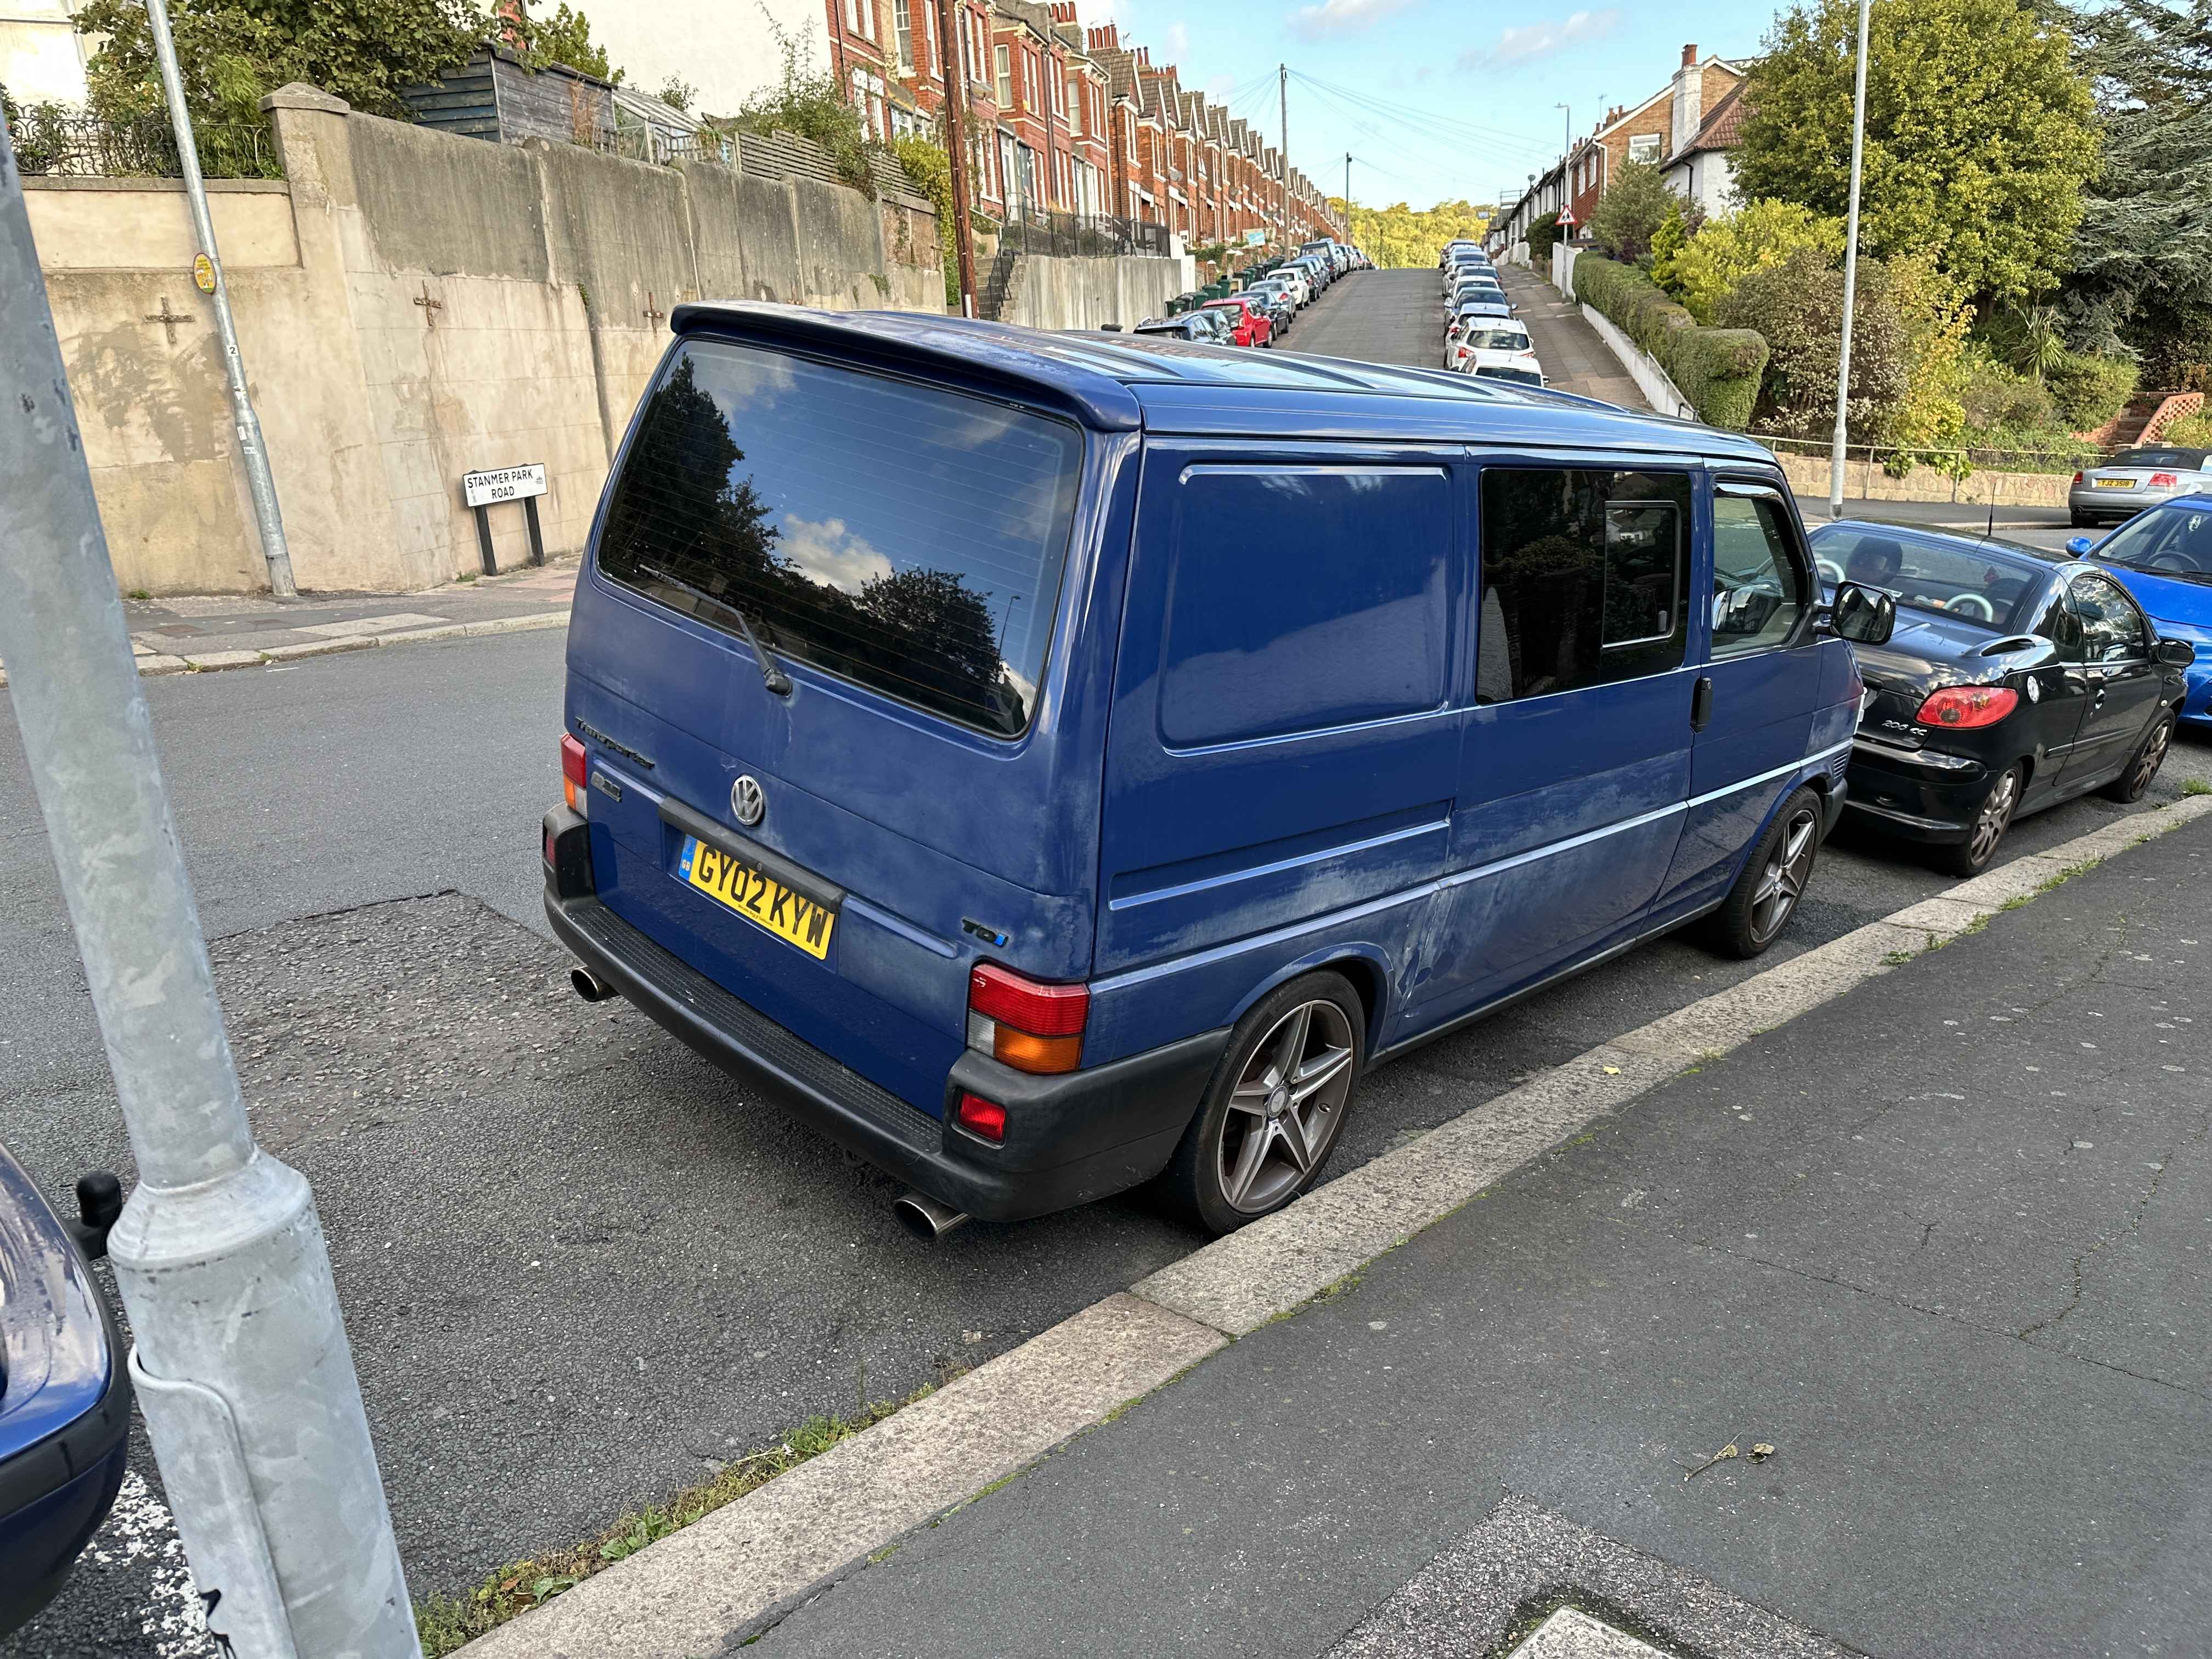 Photograph of GY02 KYW - a Blue Volkswagen Transporter camper van parked in Hollingdean by a non-resident. The eighth of eighteen photographs supplied by the residents of Hollingdean.